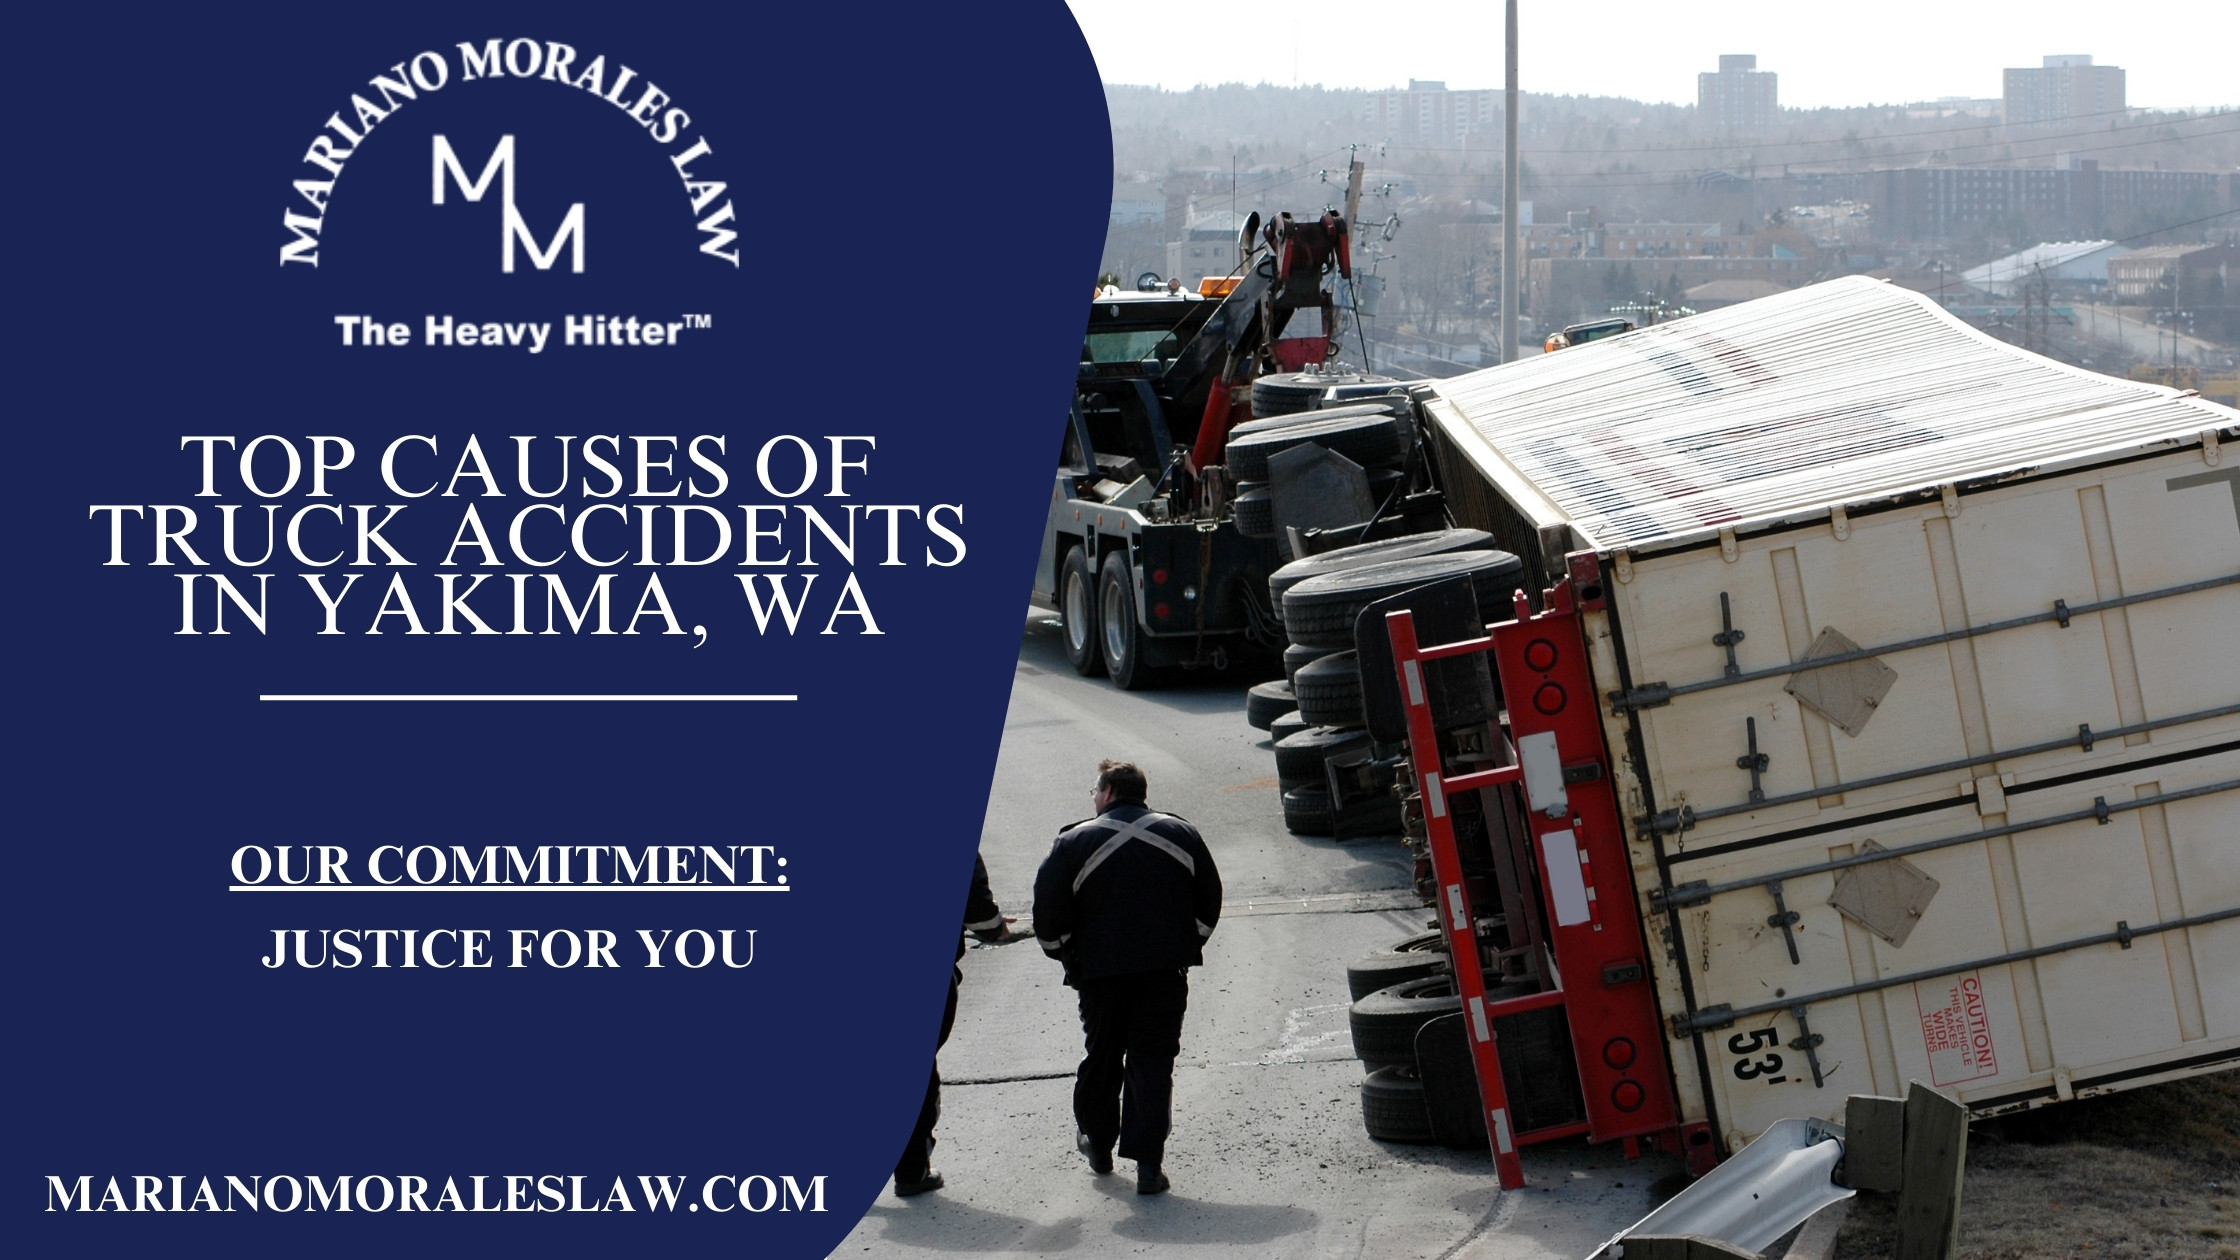 An overturned truck on a city road in Yakima, illustrating the devastating impact discussed in "Top Causes of Truck Accidents in Yakima, WA" by Mariano Morales Law.